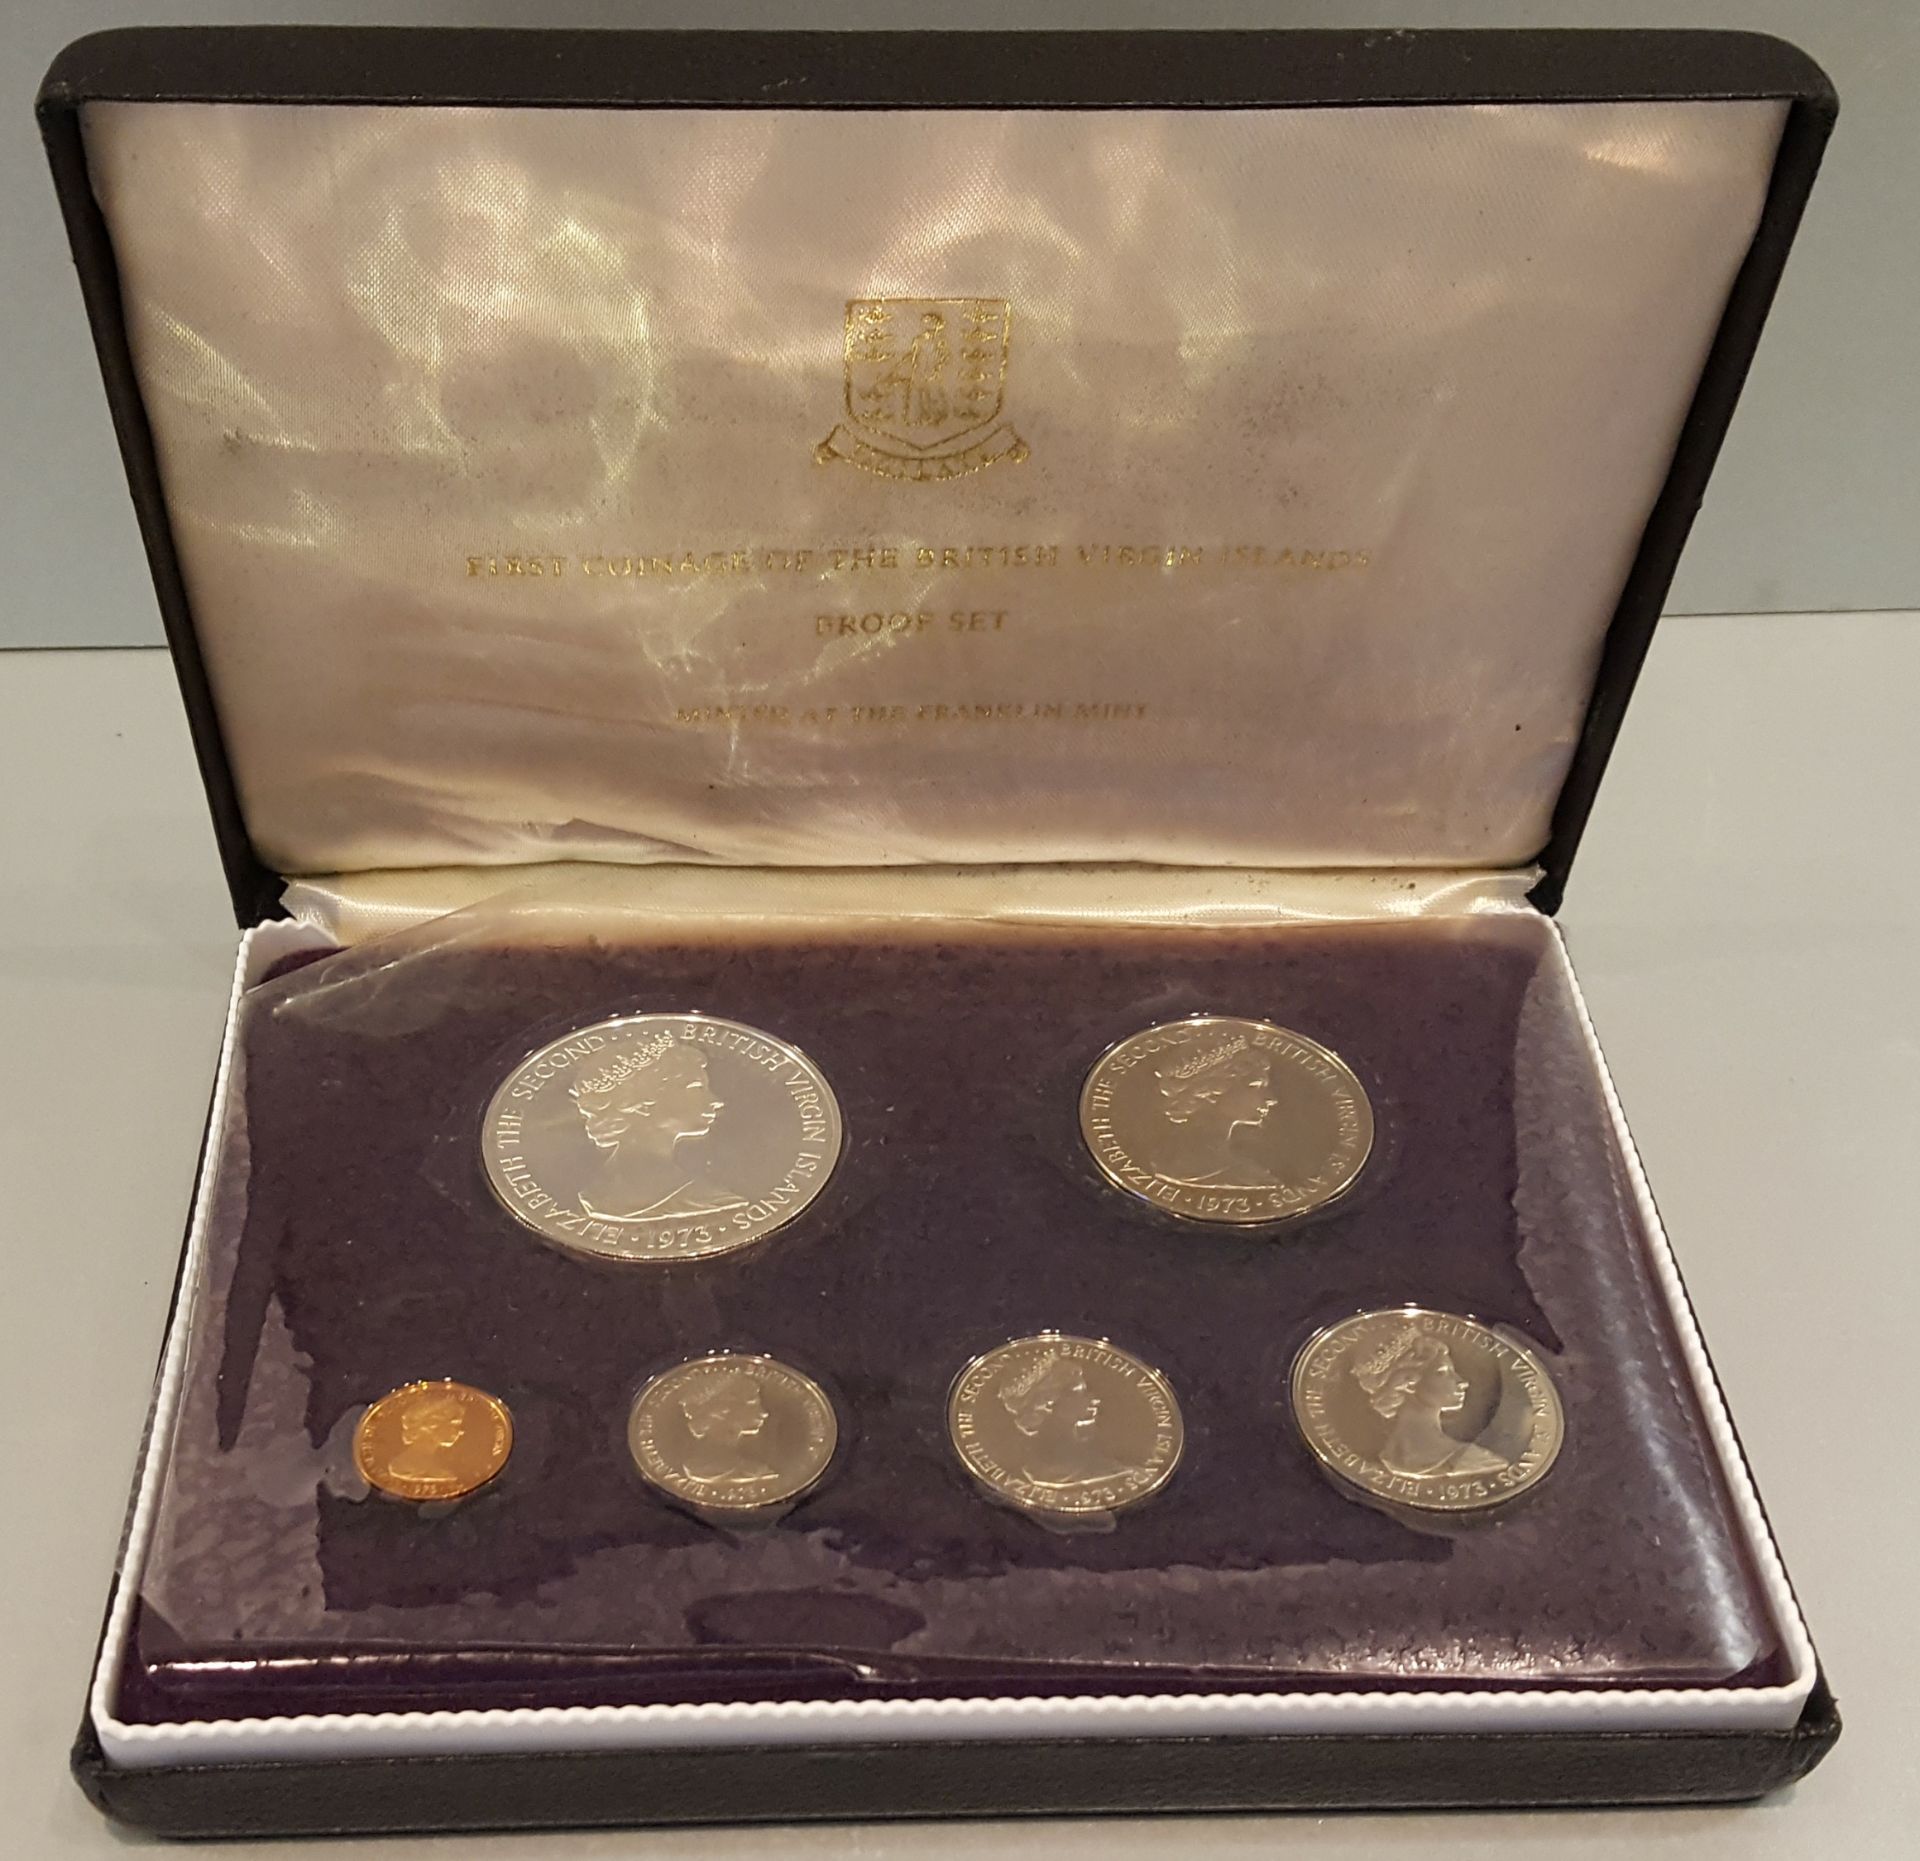 Collectable Coins 1st Official British Virgin Ireland Coins Proof Set 1970